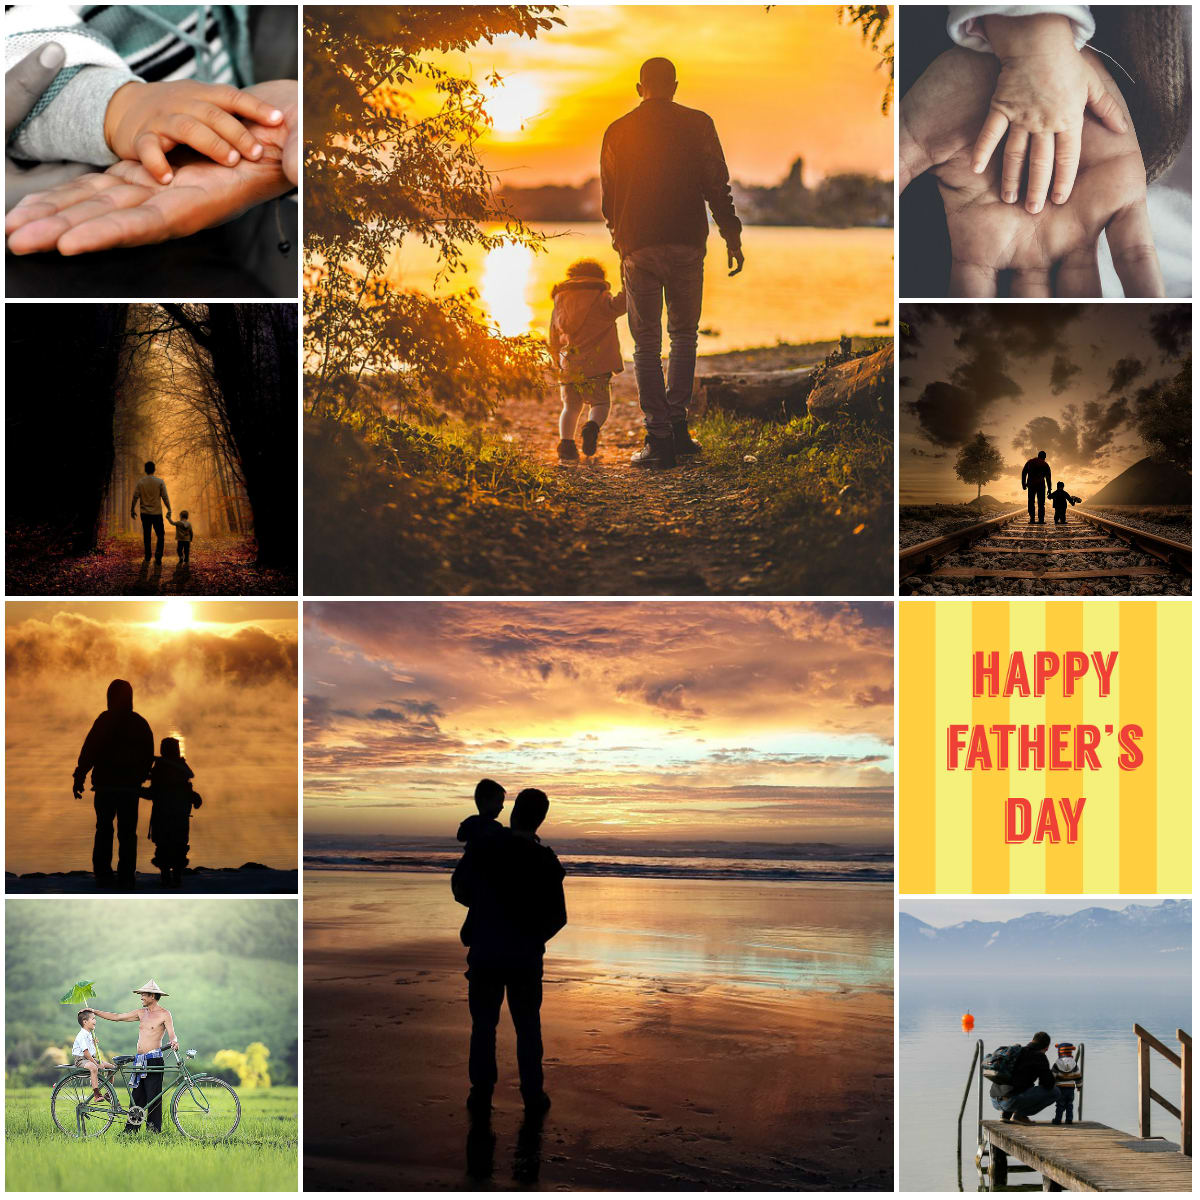 Motivation Mondays: For Our Fathers #fathersday